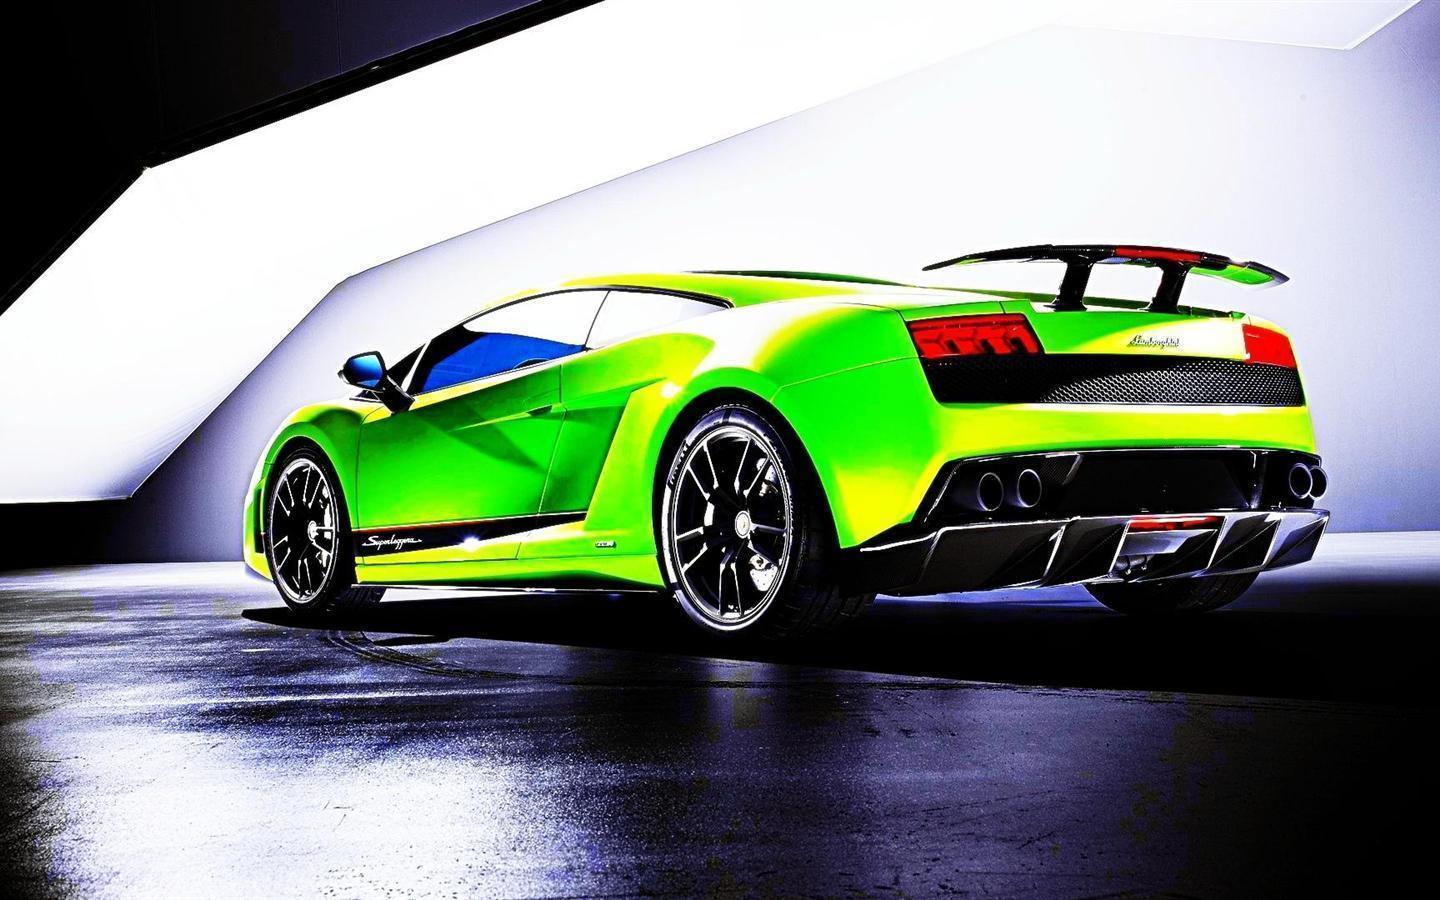 View Wallpaper Pictures Of Sports Cars Pics